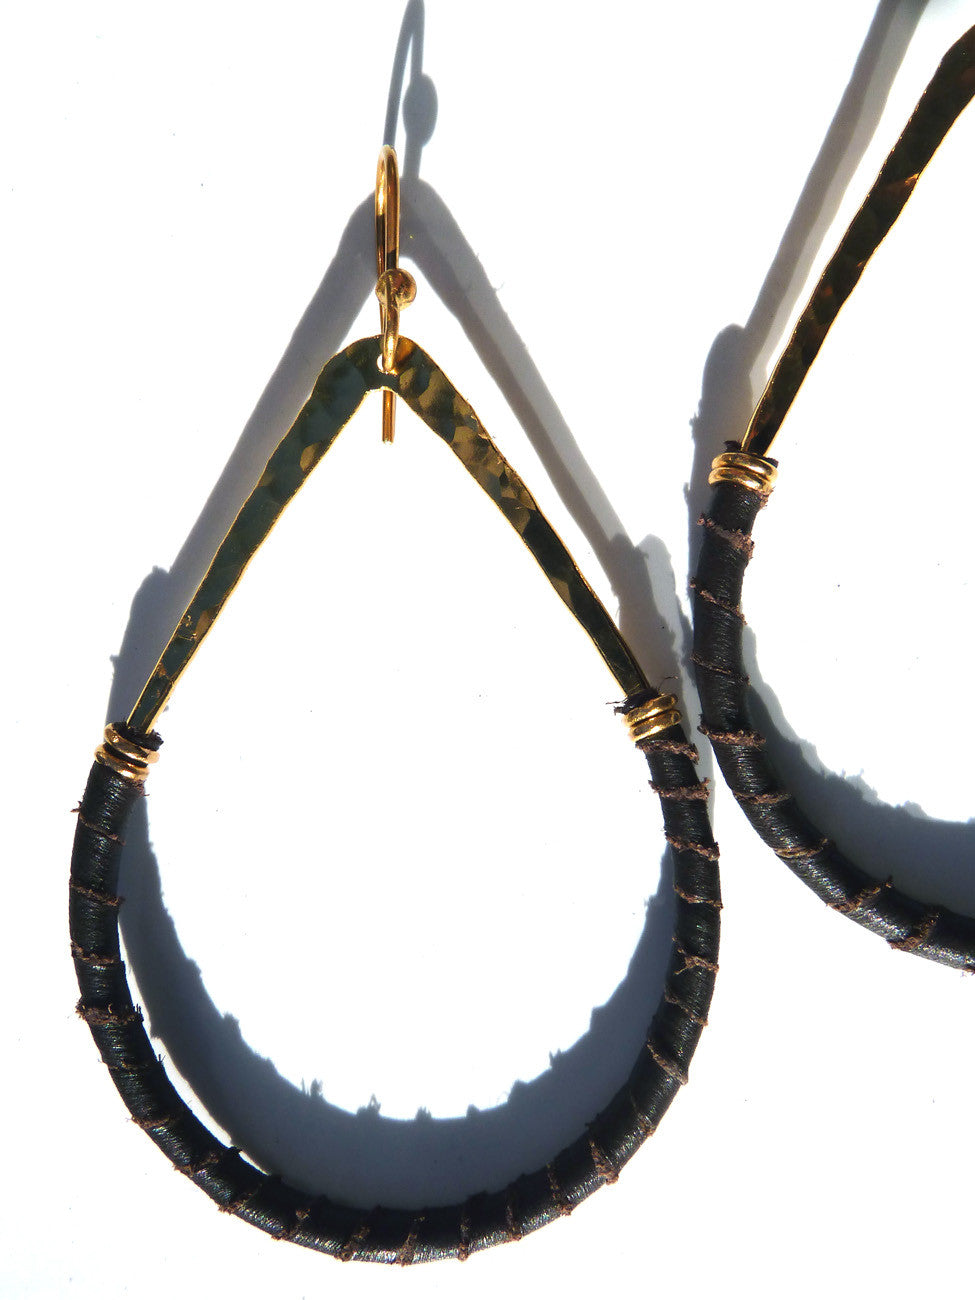 Earrings Teardrop Gold Plated Brass And Leather